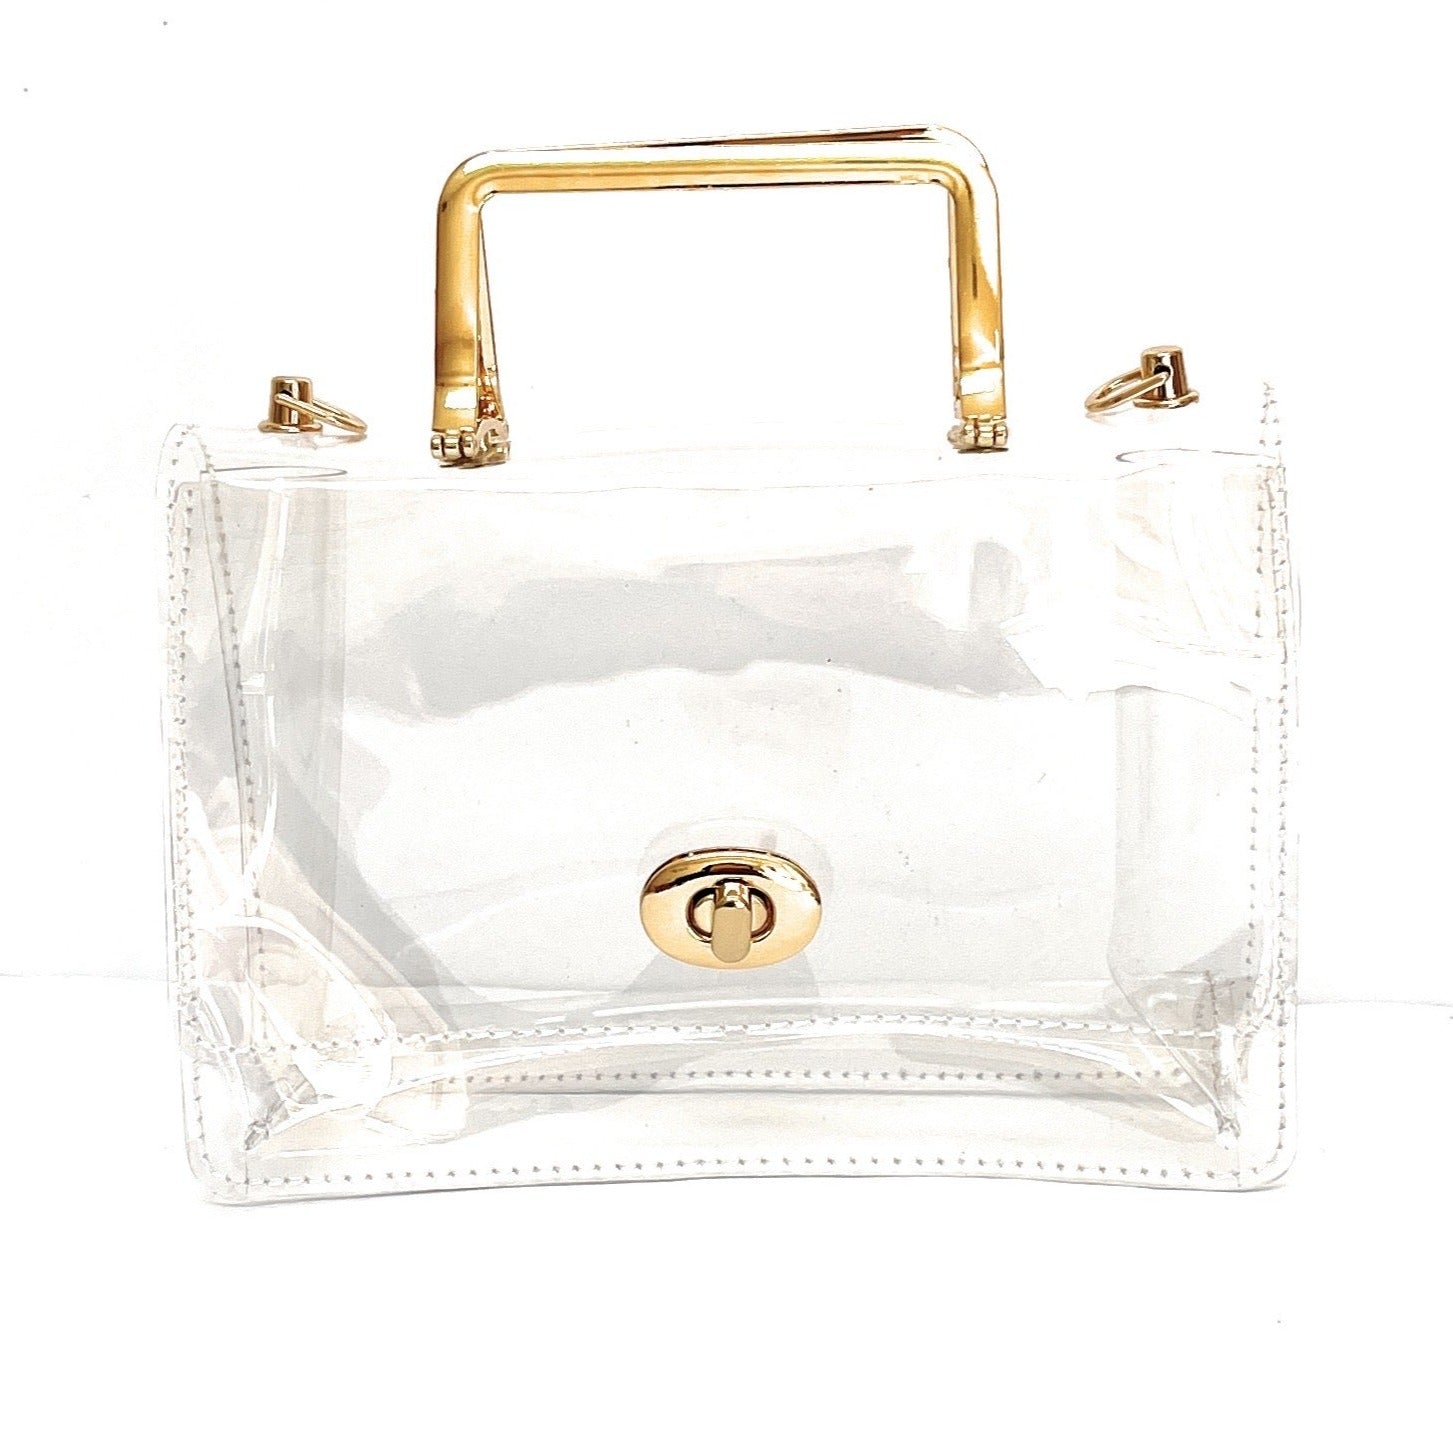  Clear Bag Stadium Approved, Clear Purse, Clear Bags